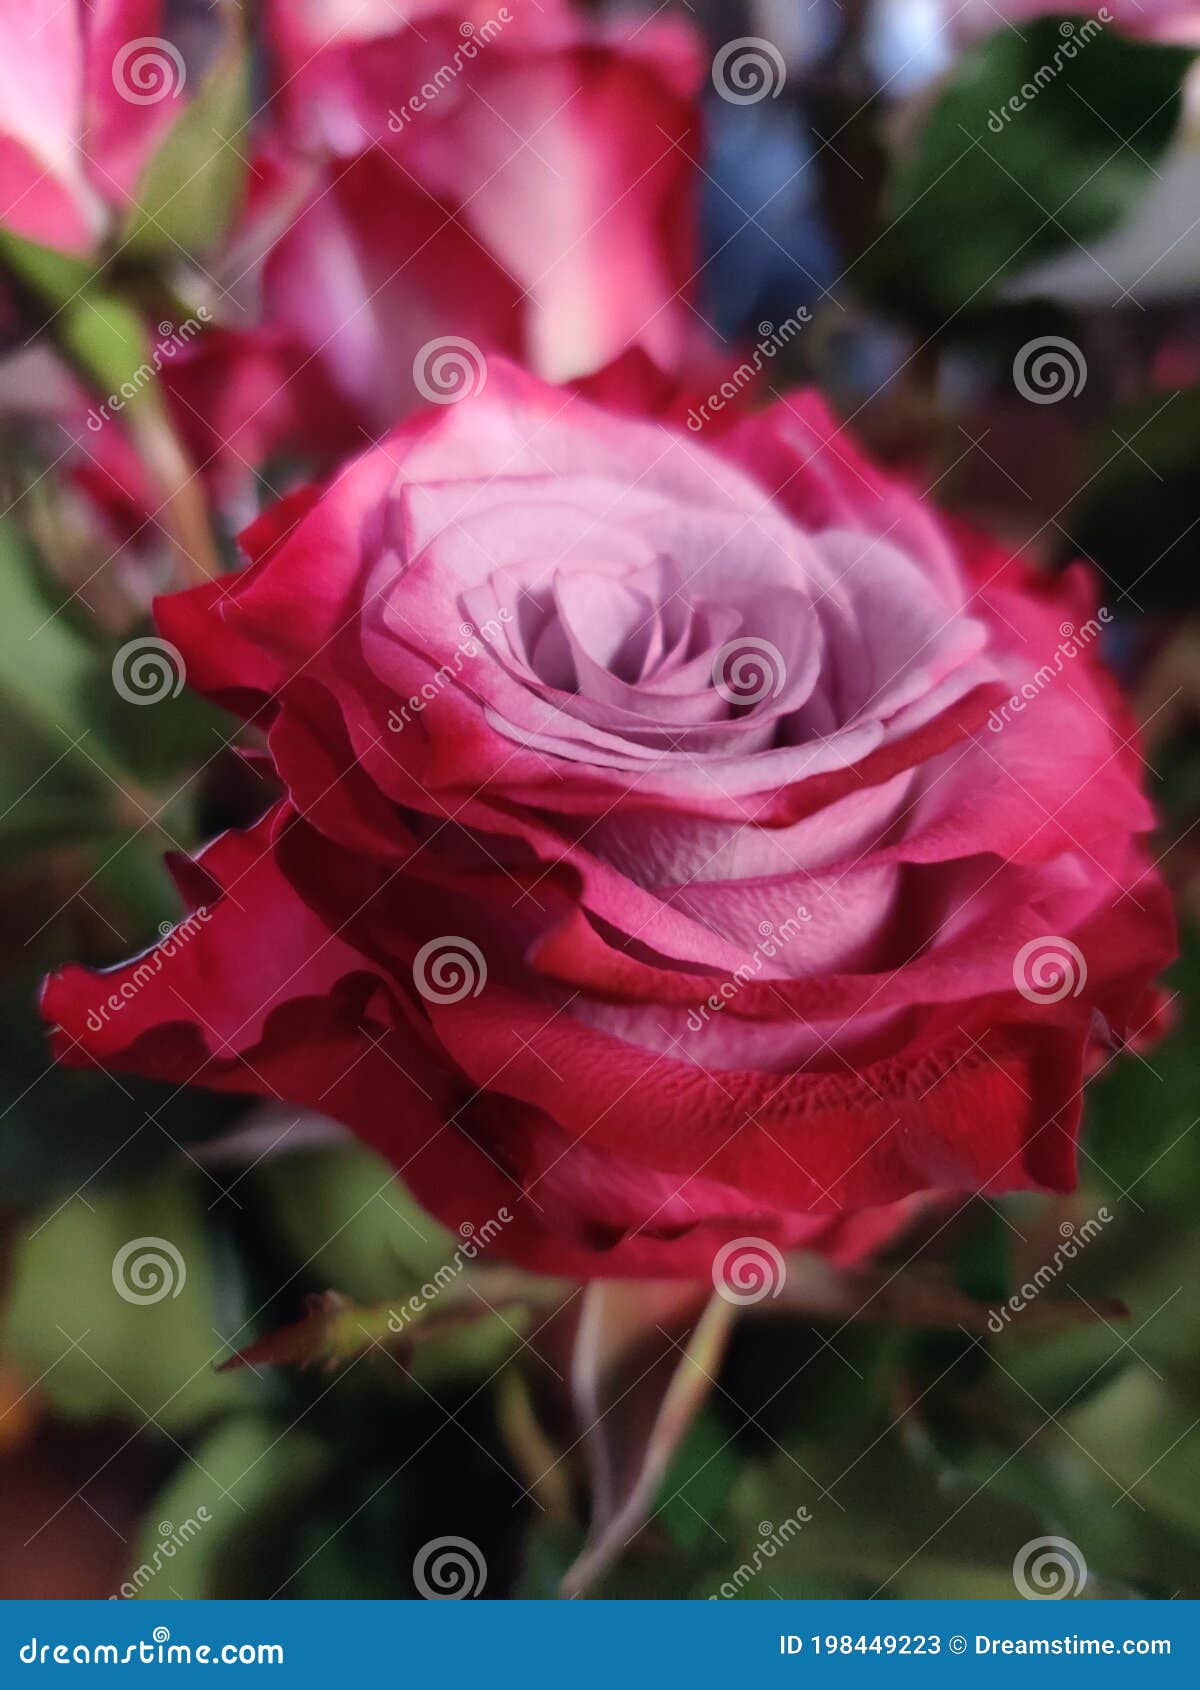 roses redpink nature& x27;s beauty